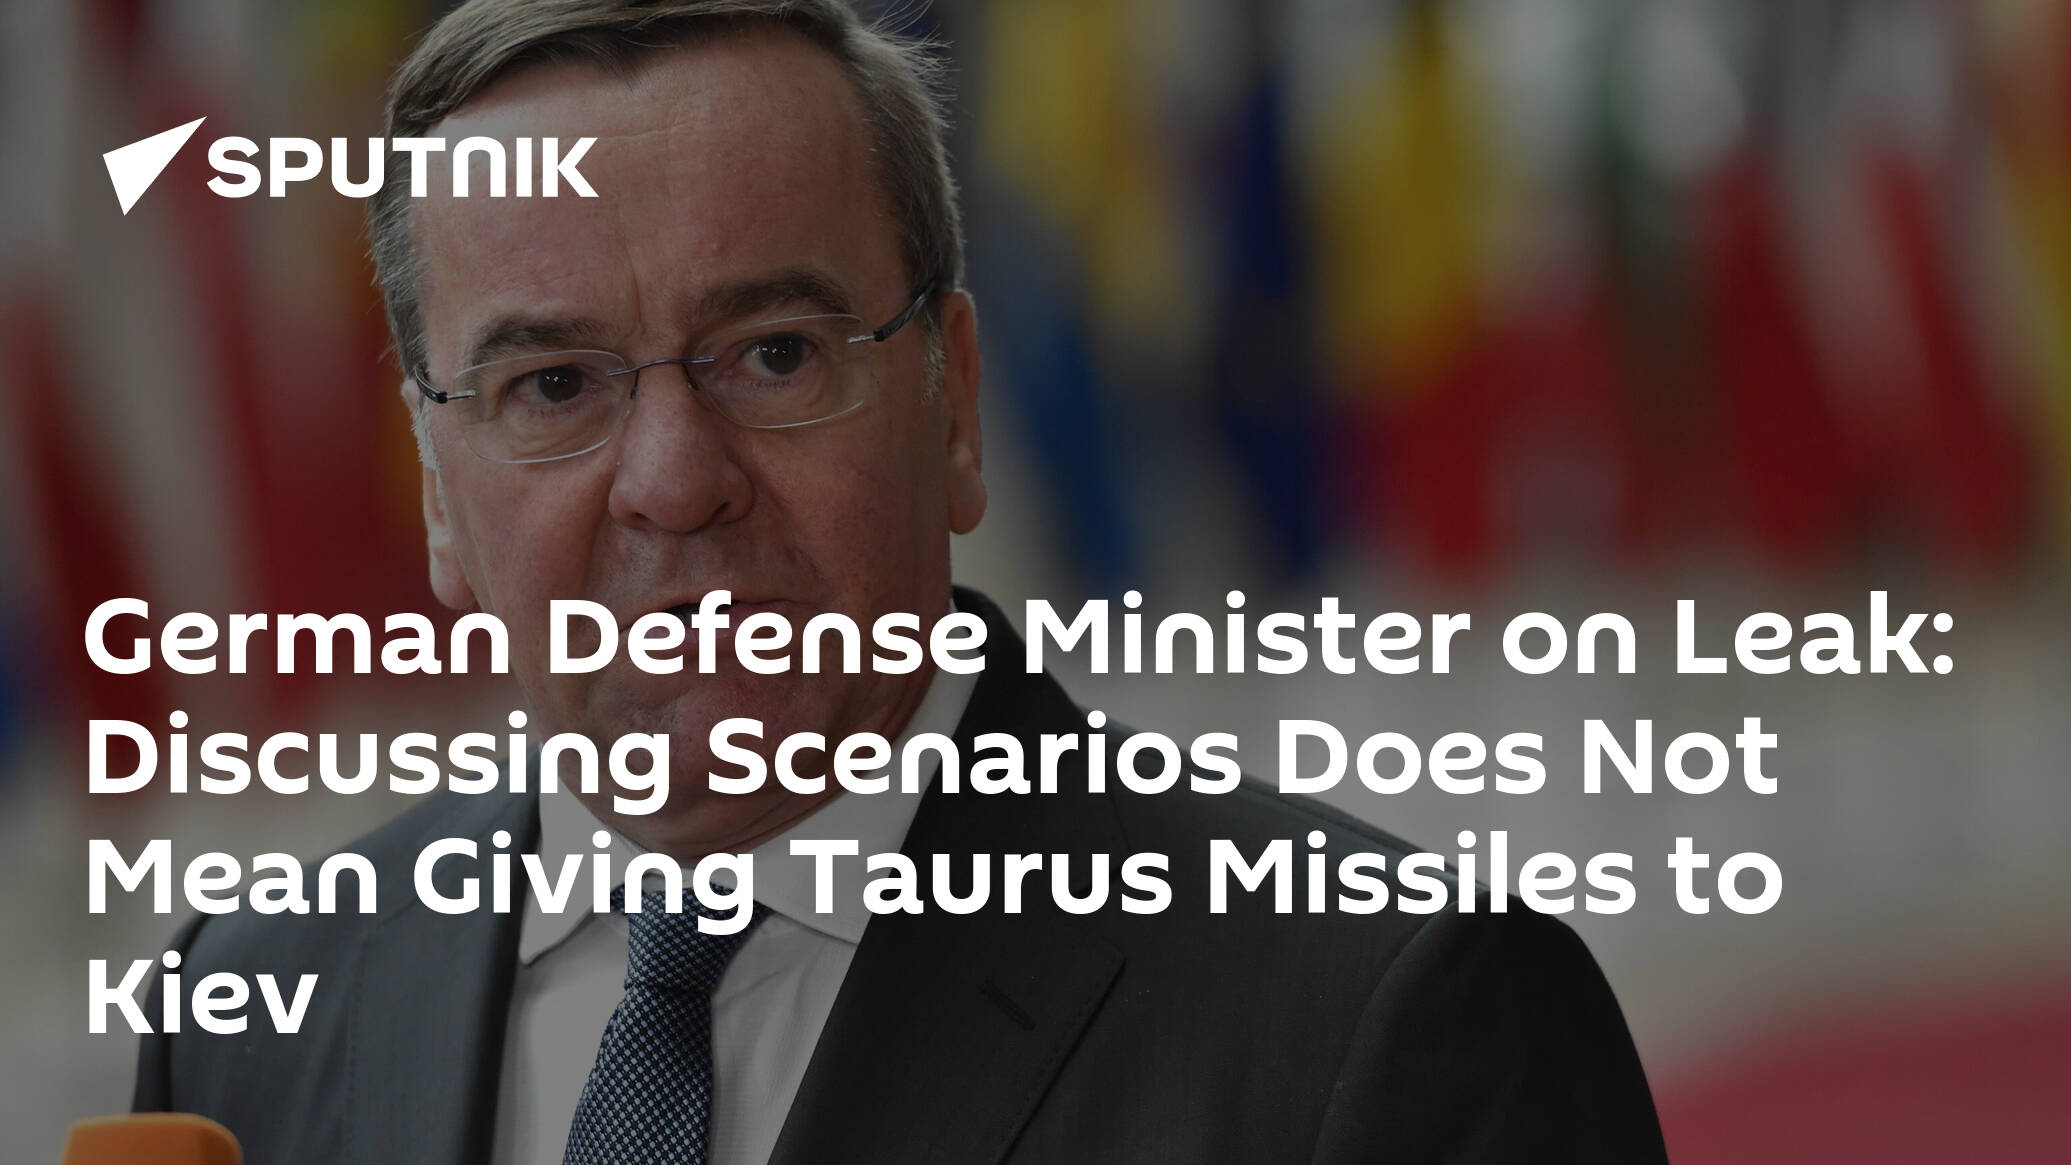 German Defense Minister on Leak: Discussing Scenarios Does Not Mean Giving Taurus Missiles to Kiev